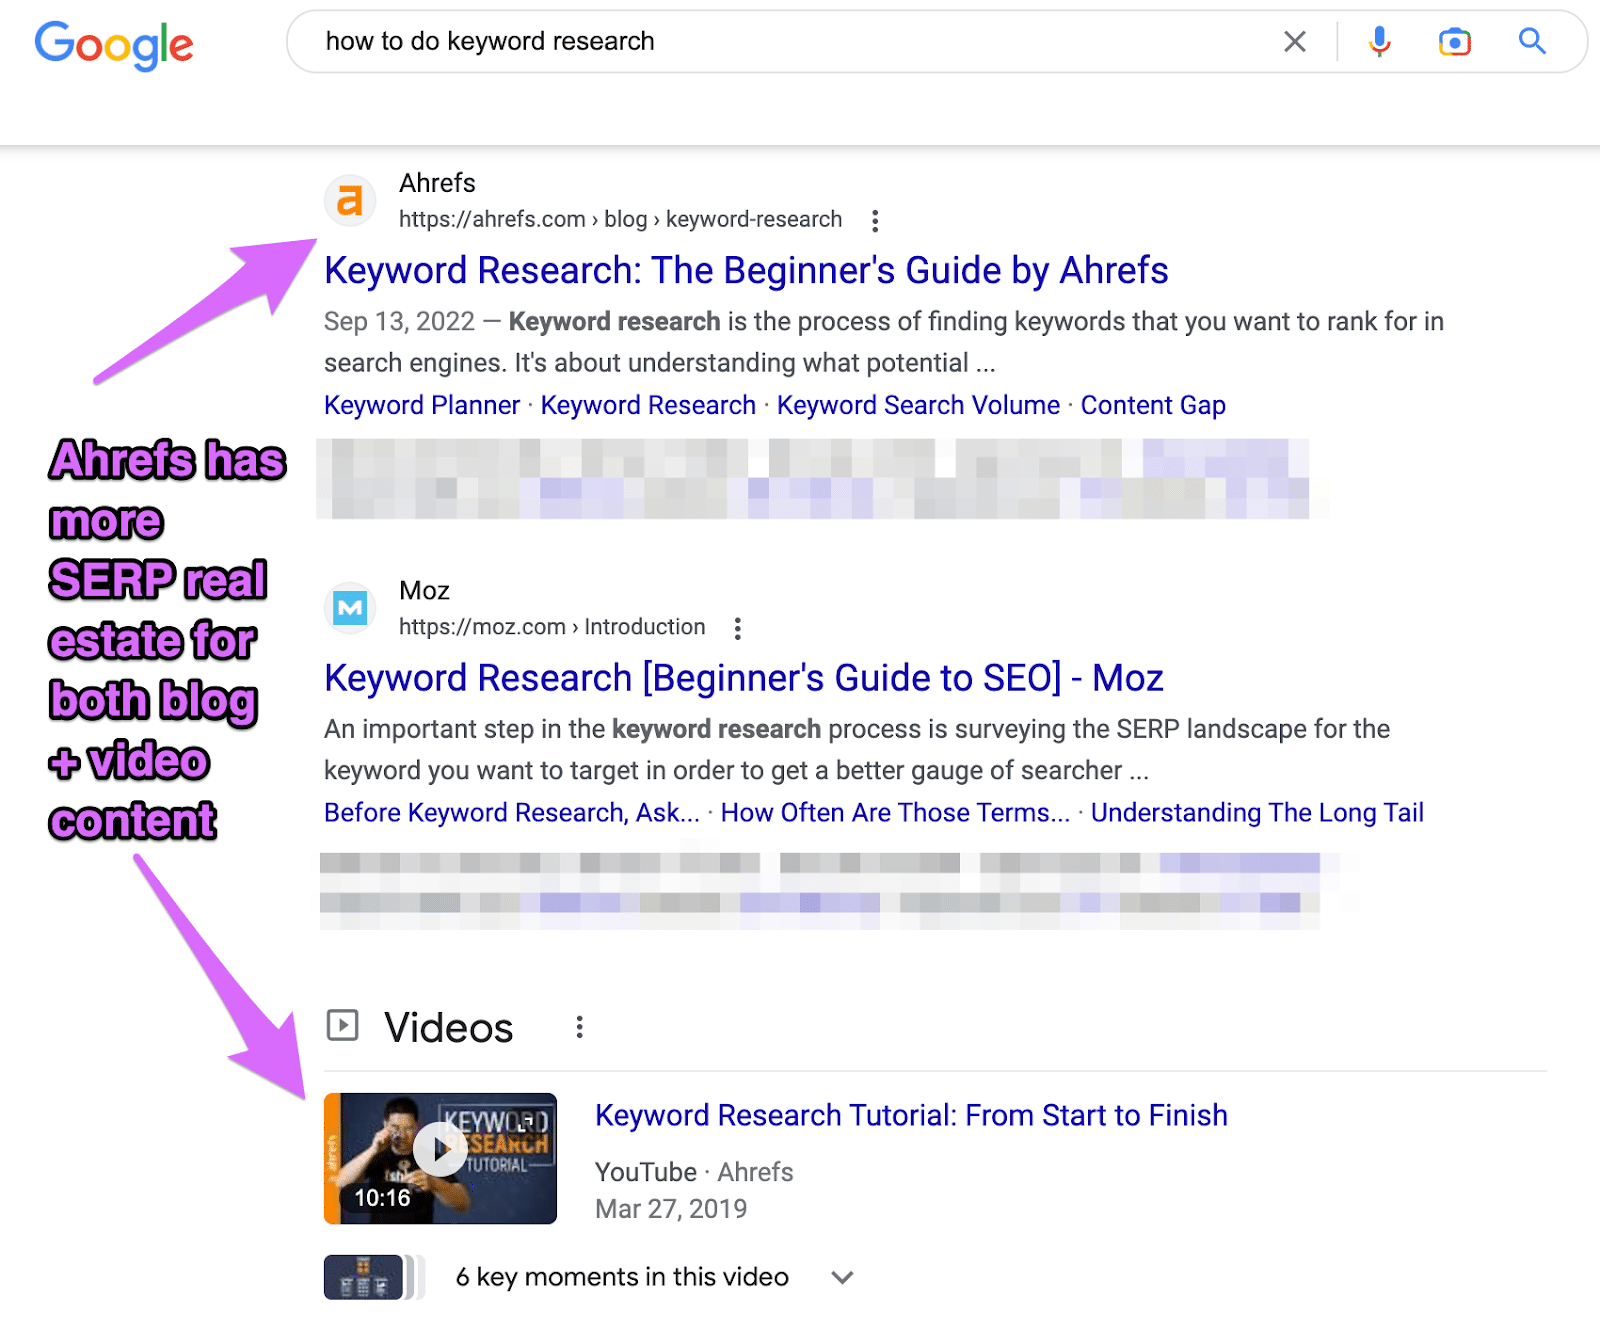 example of the SERP ranking two pieces of content for video and blog content in this post about whether you should build one website vs multiple sites